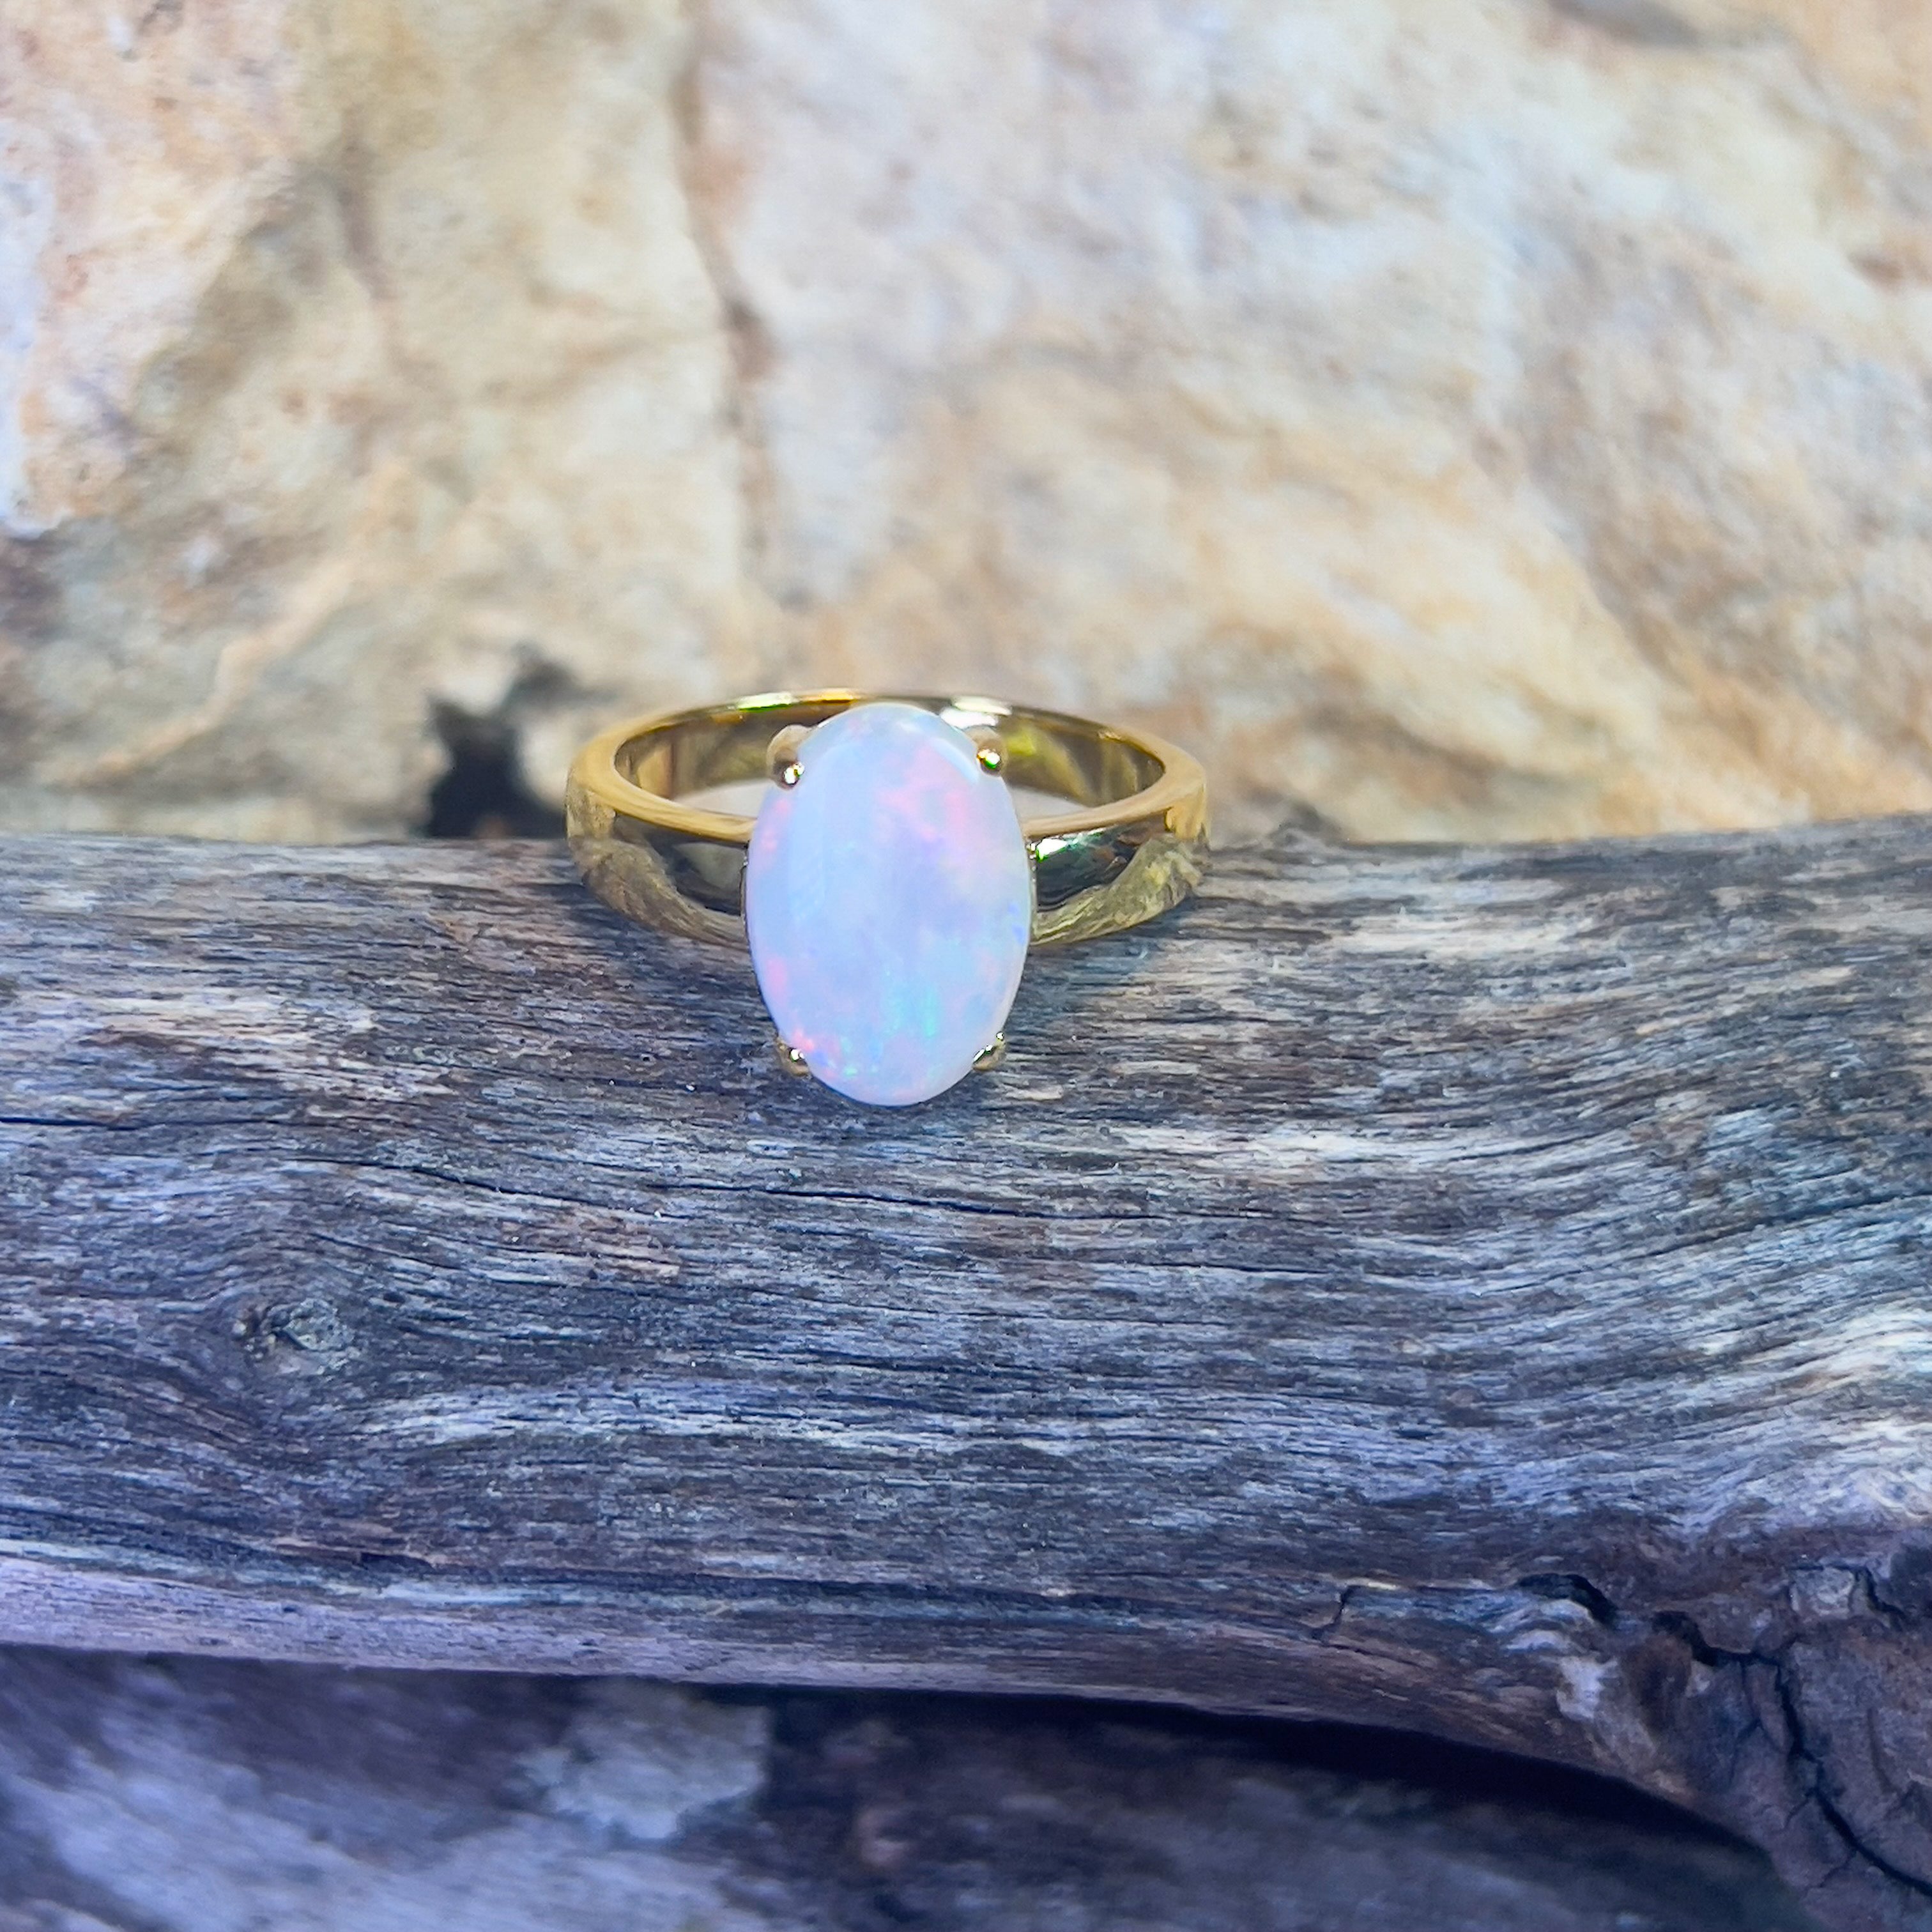 Gold Plated Sterling Silver solitaire White Opal ring 1.1ct - Masterpiece Jewellery Opal & Gems Sydney Australia | Online Shop